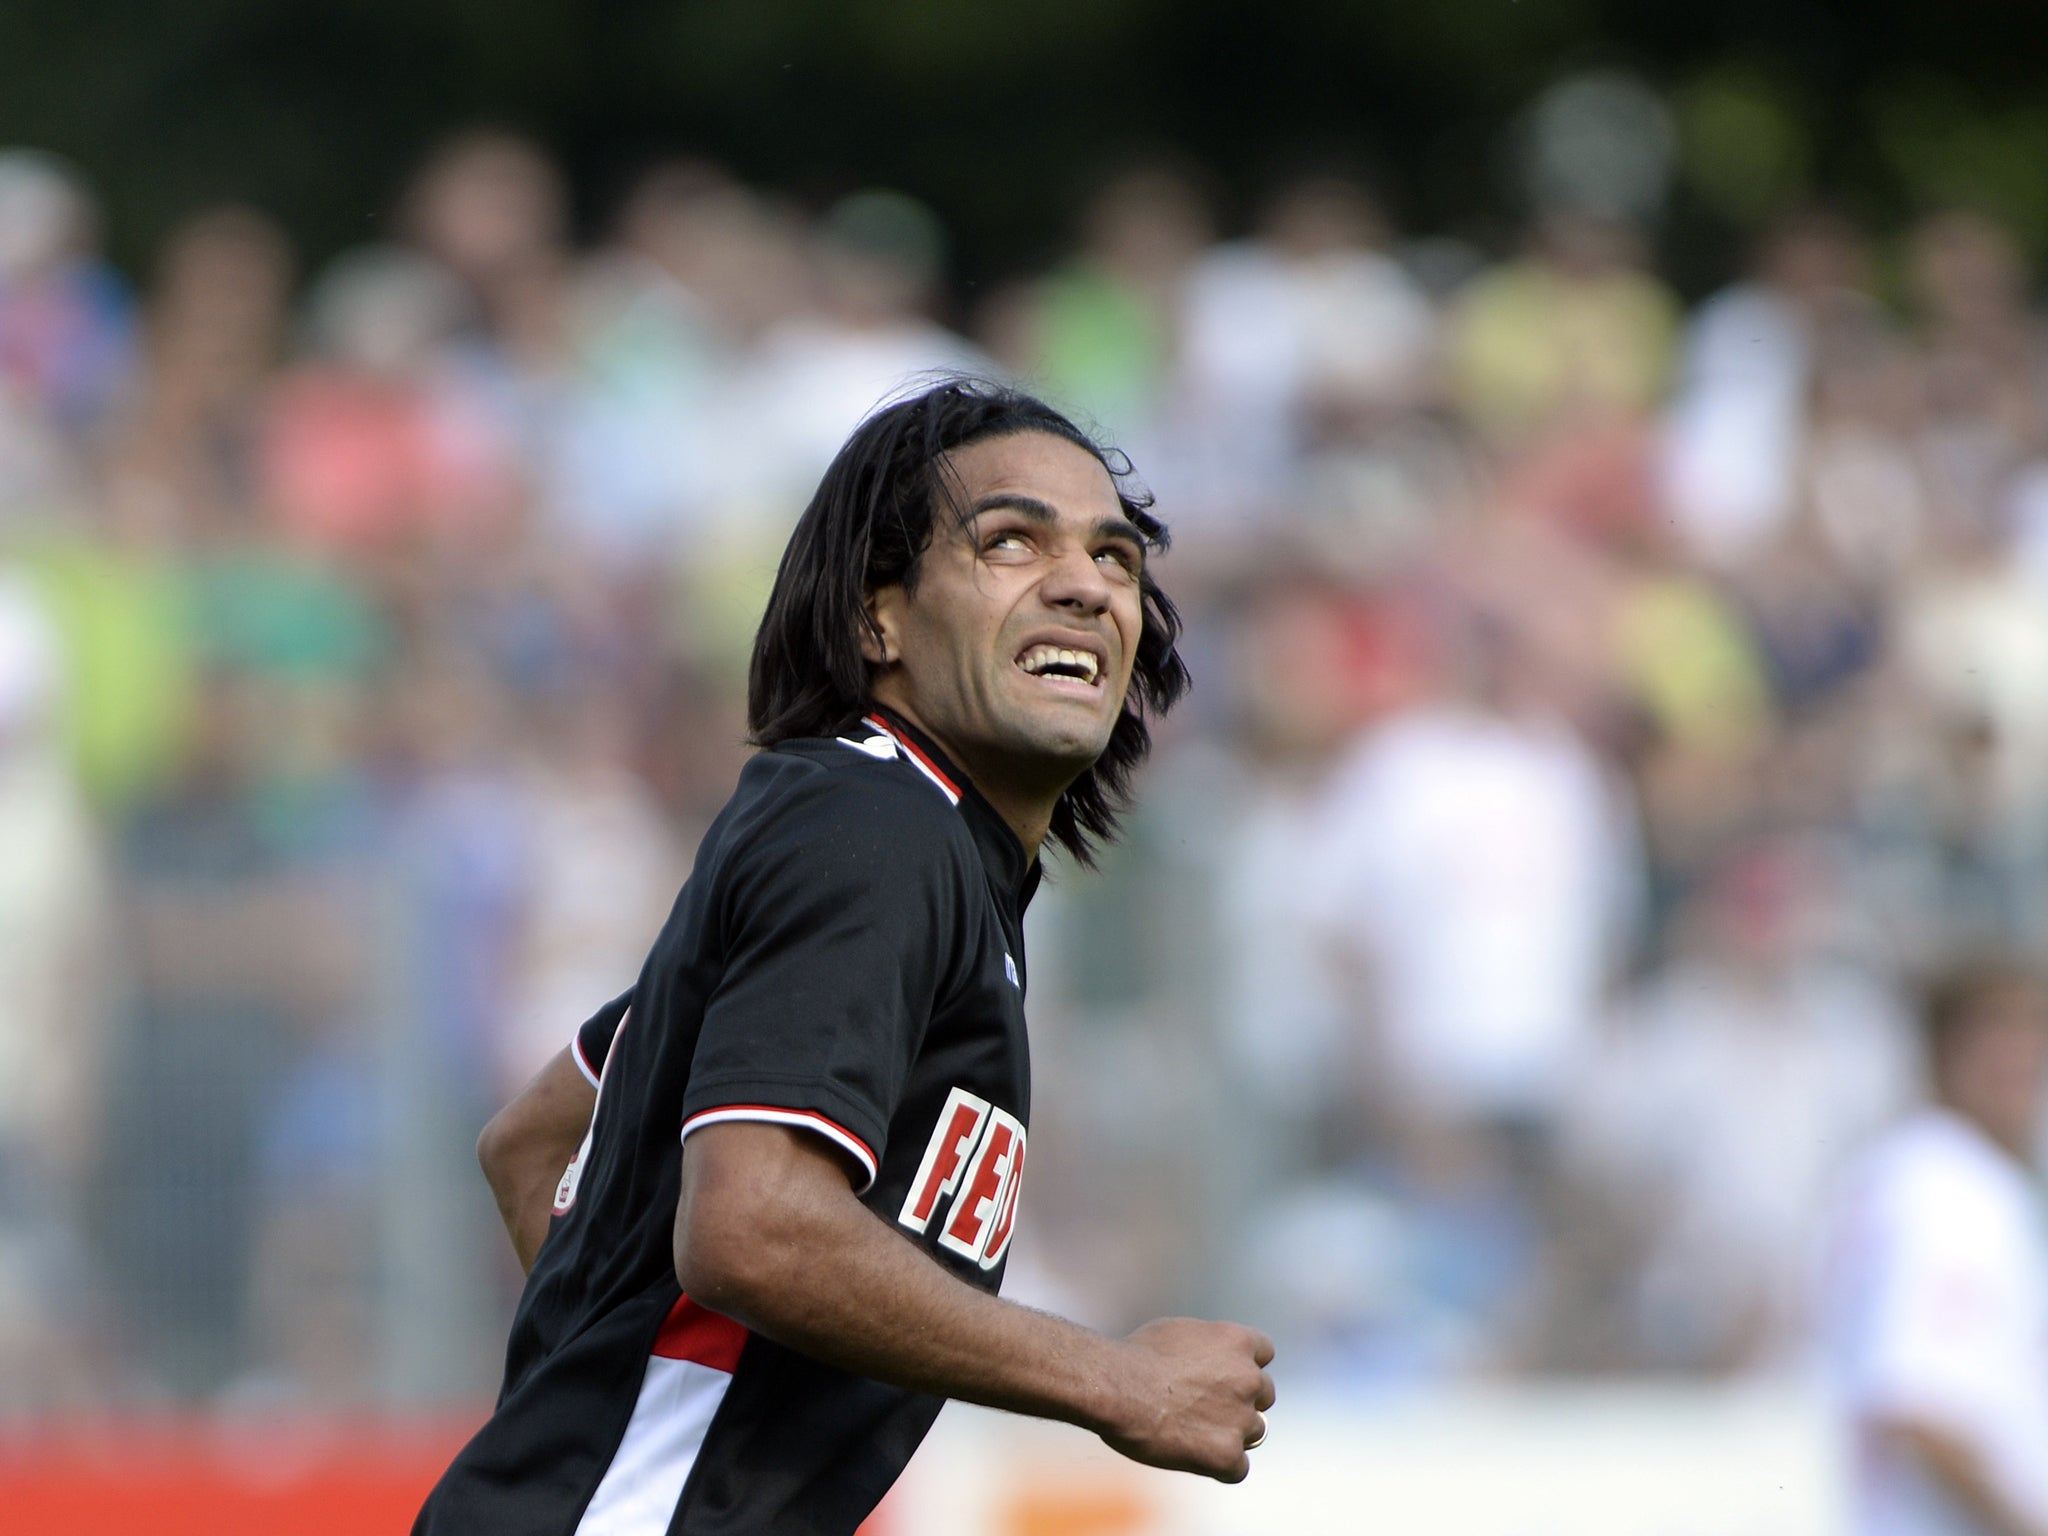 Falcao in action for his new club AS Monaco